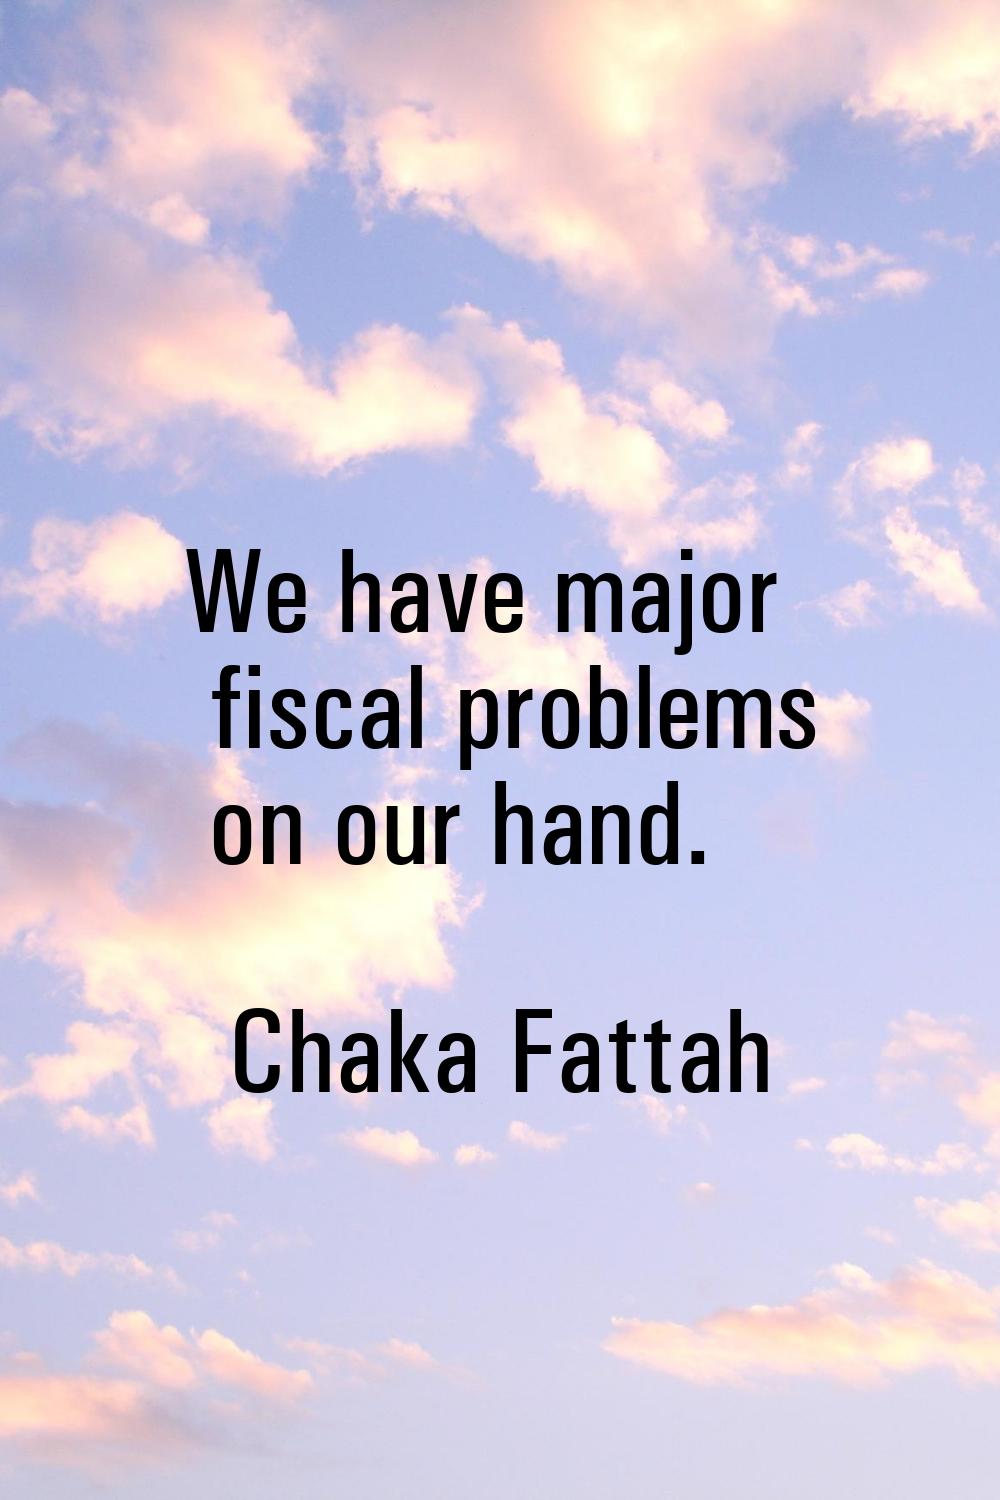 We have major fiscal problems on our hand.